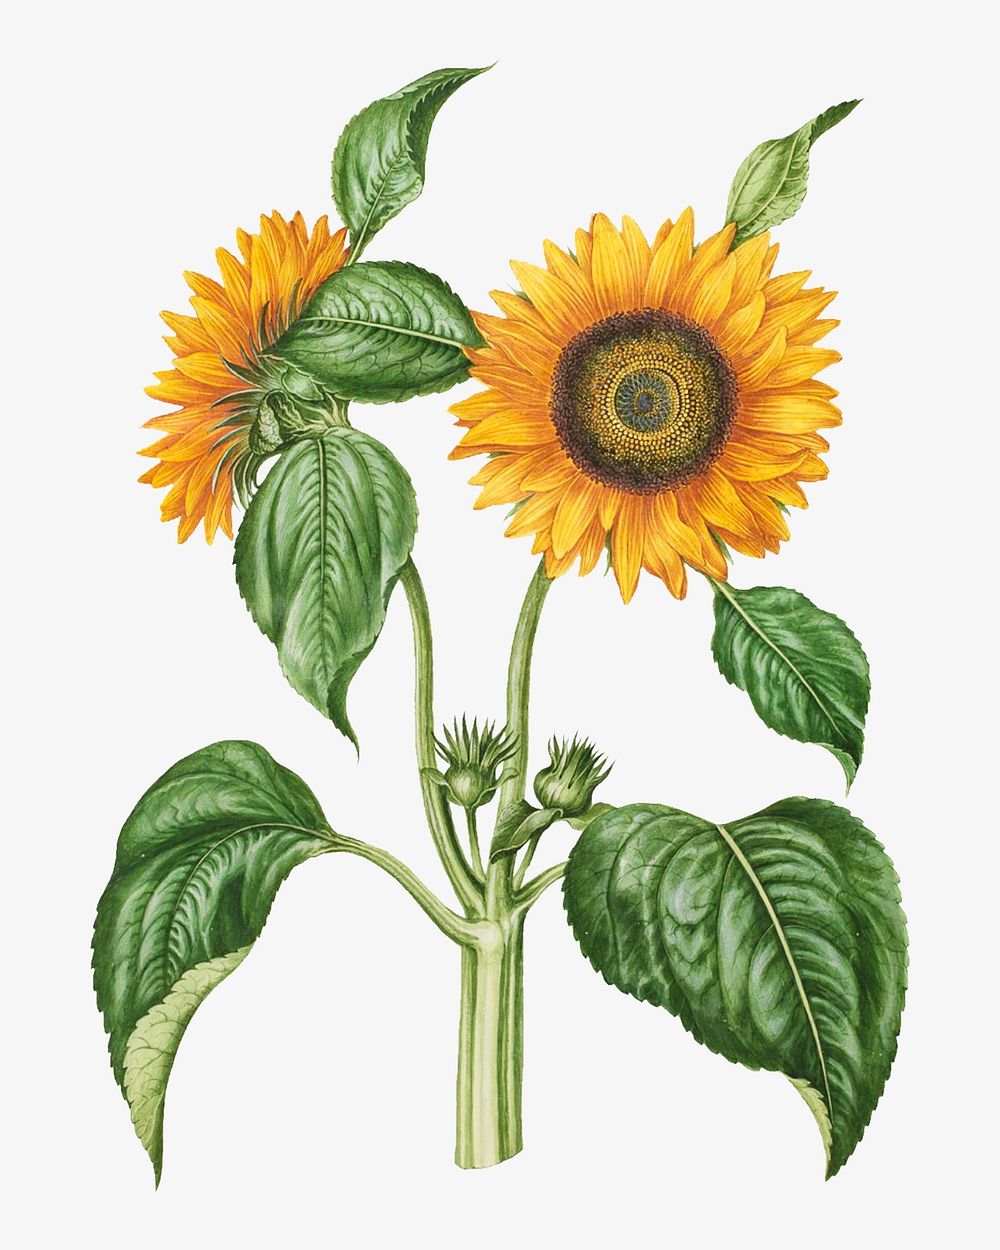 Vintage sunflower, flower illustration by Maria Sibylla Merian. Remixed by rawpixel.